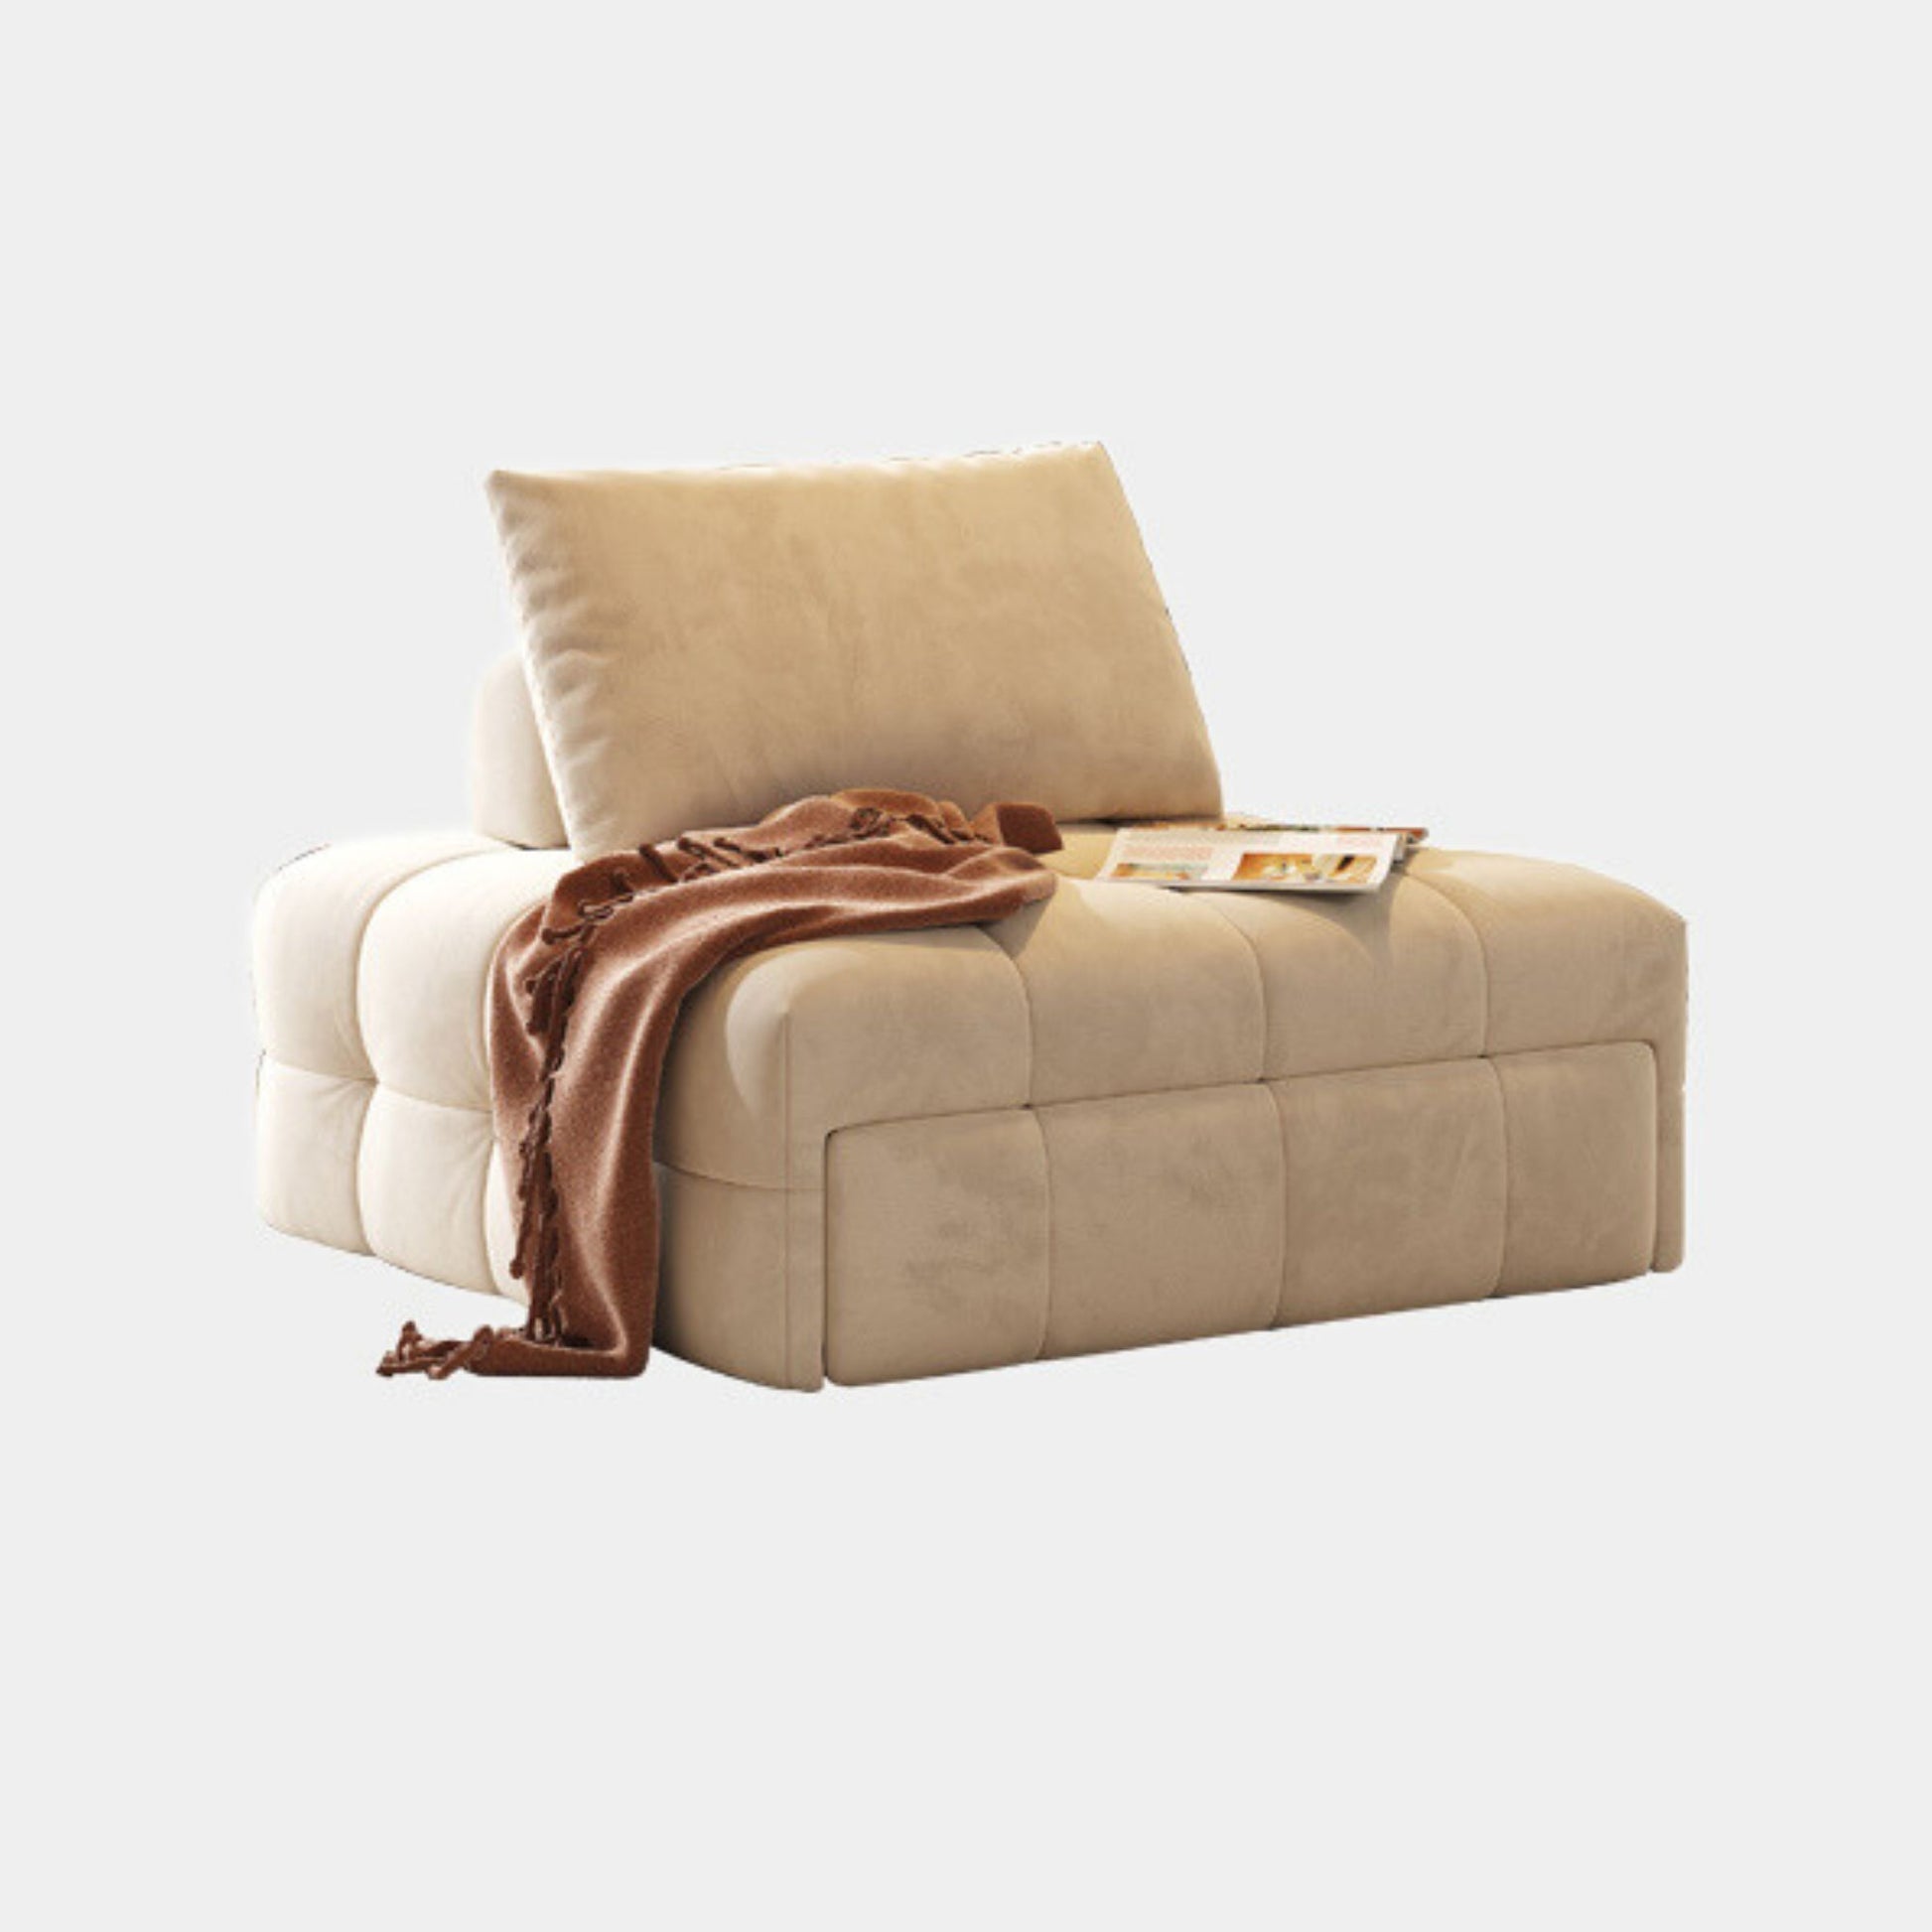 Candy beige fabric sofa bed